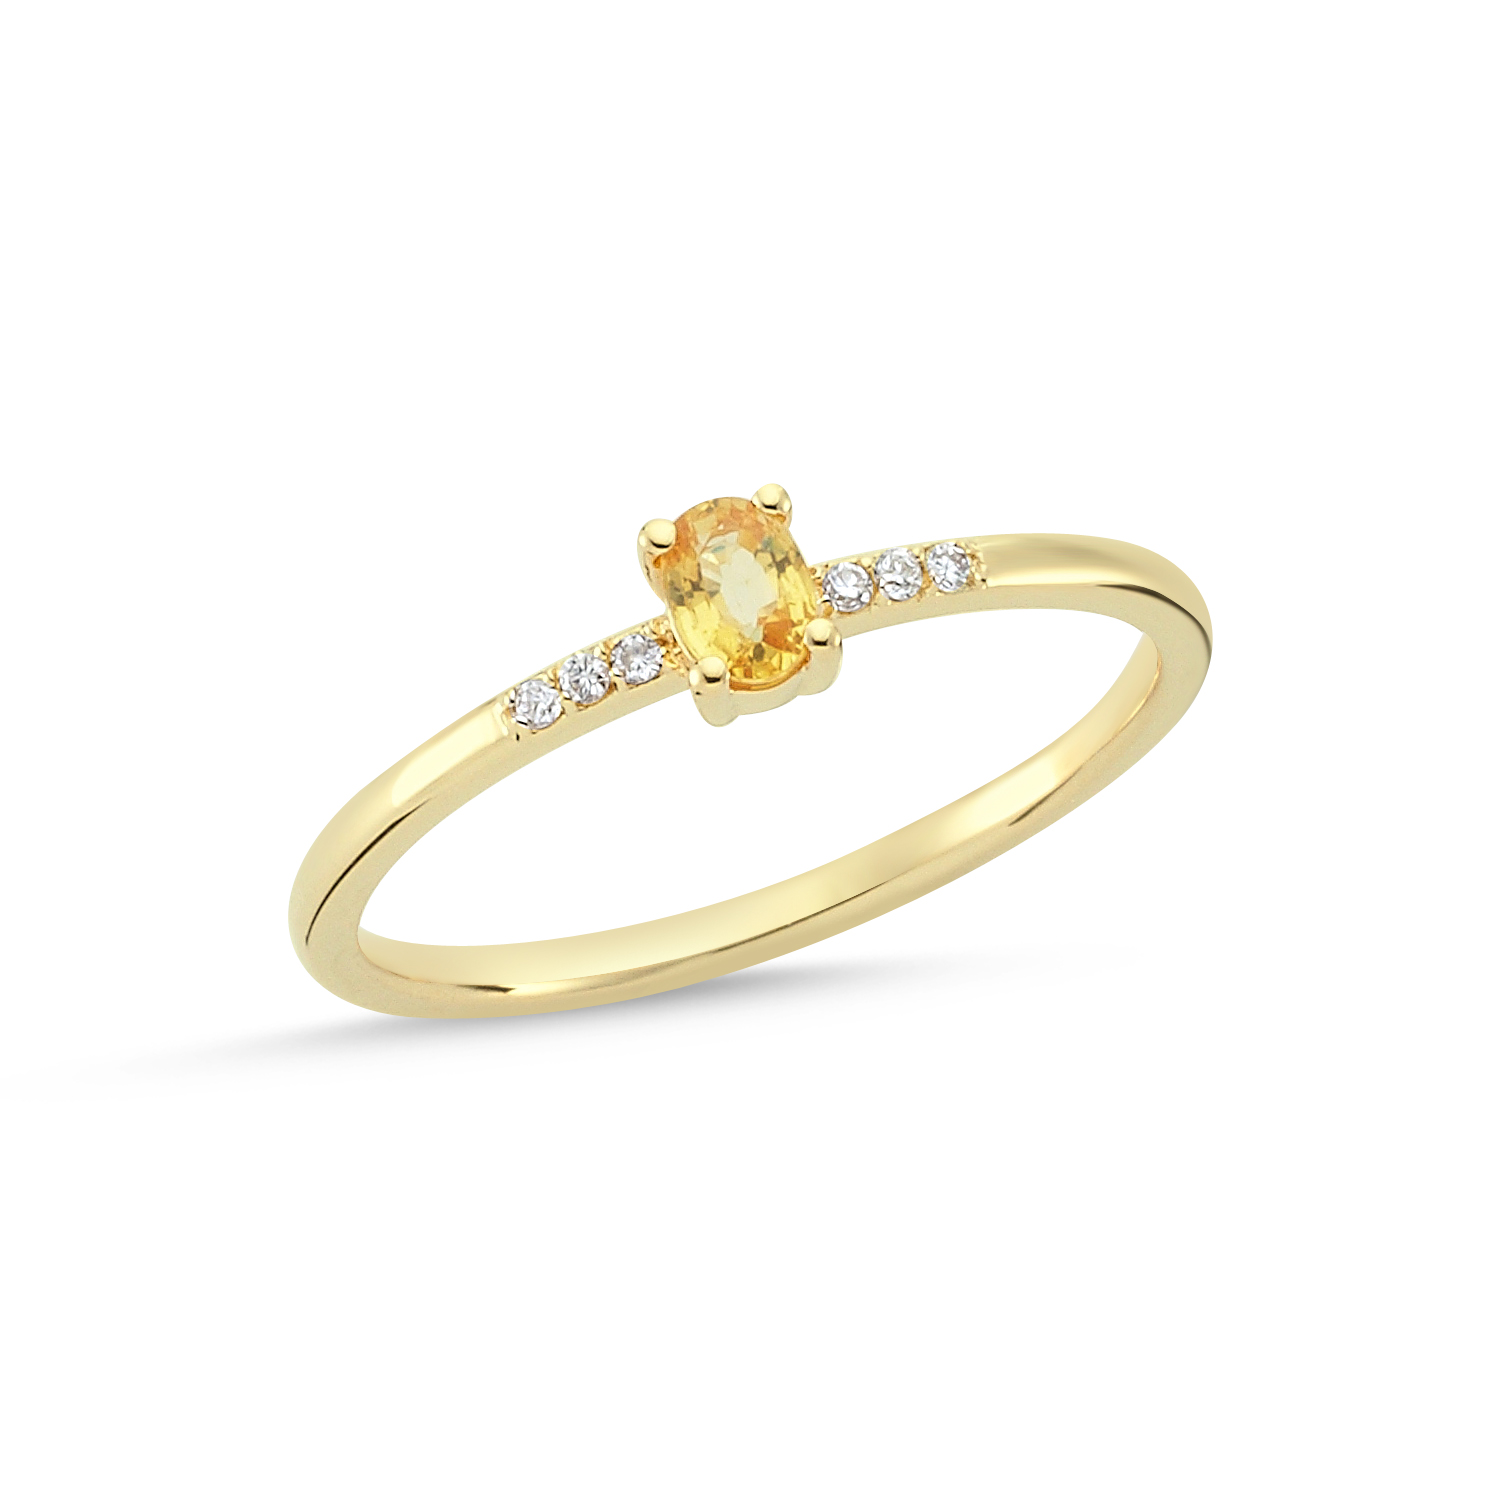 Oval Cut Yellow Sapphire and Diamond Ring